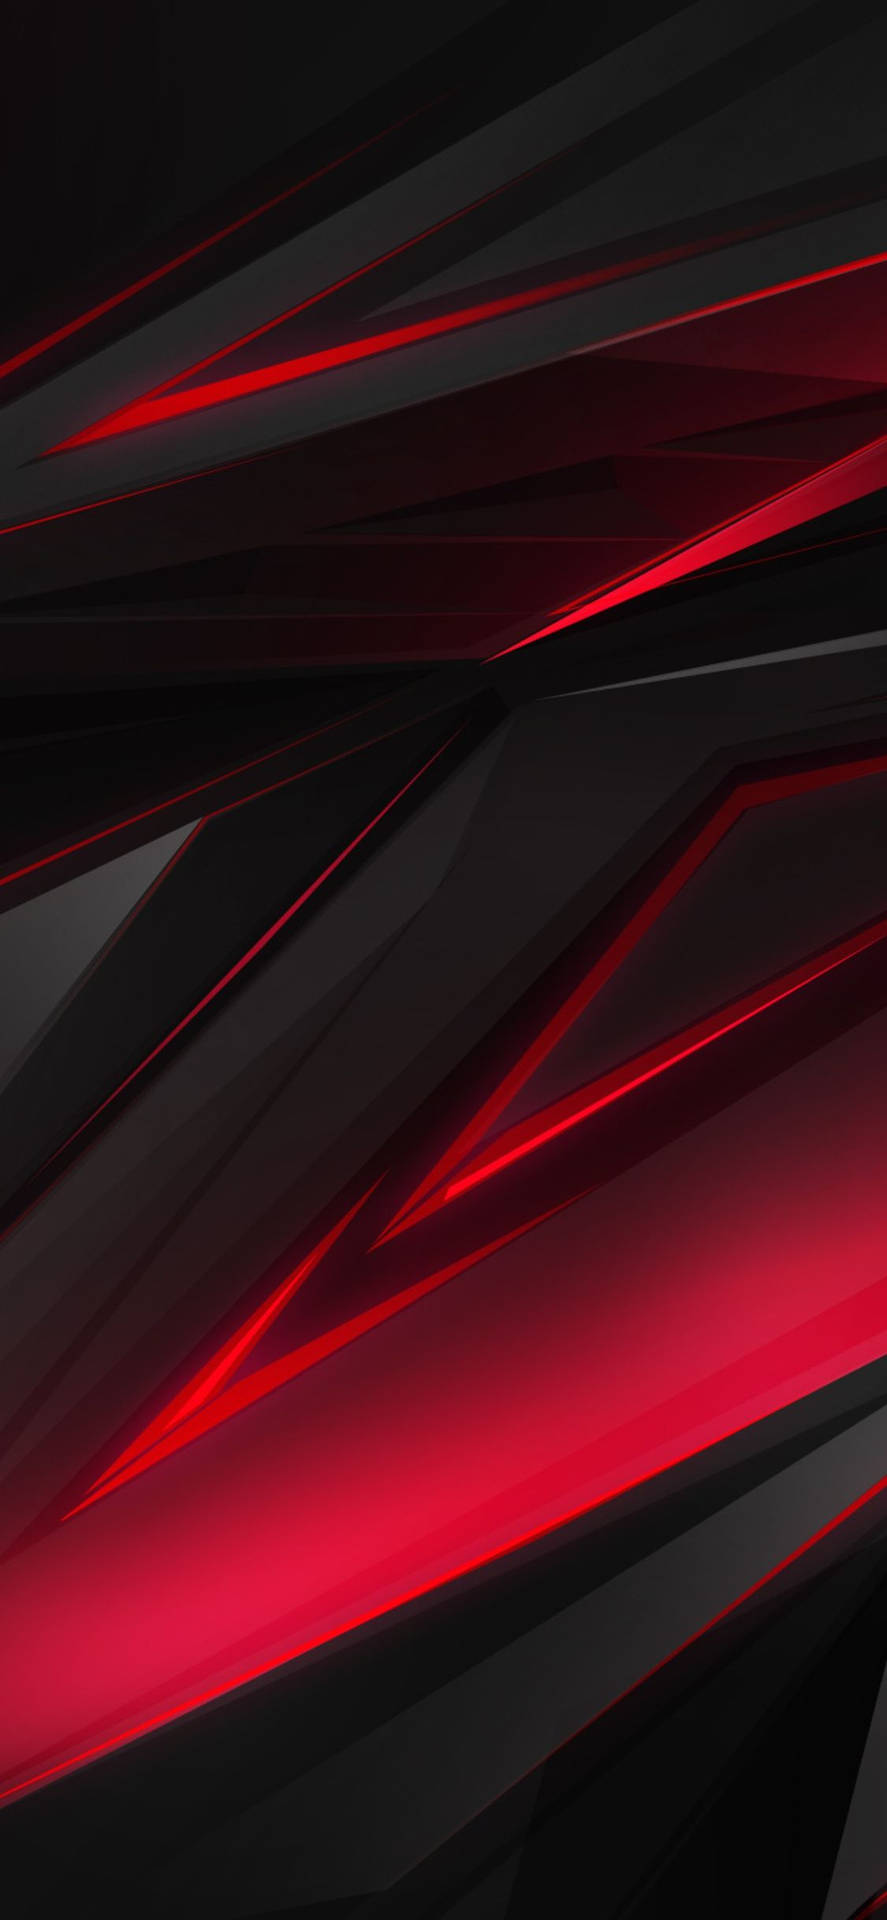 A Black And Red Abstract Background Wallpaper